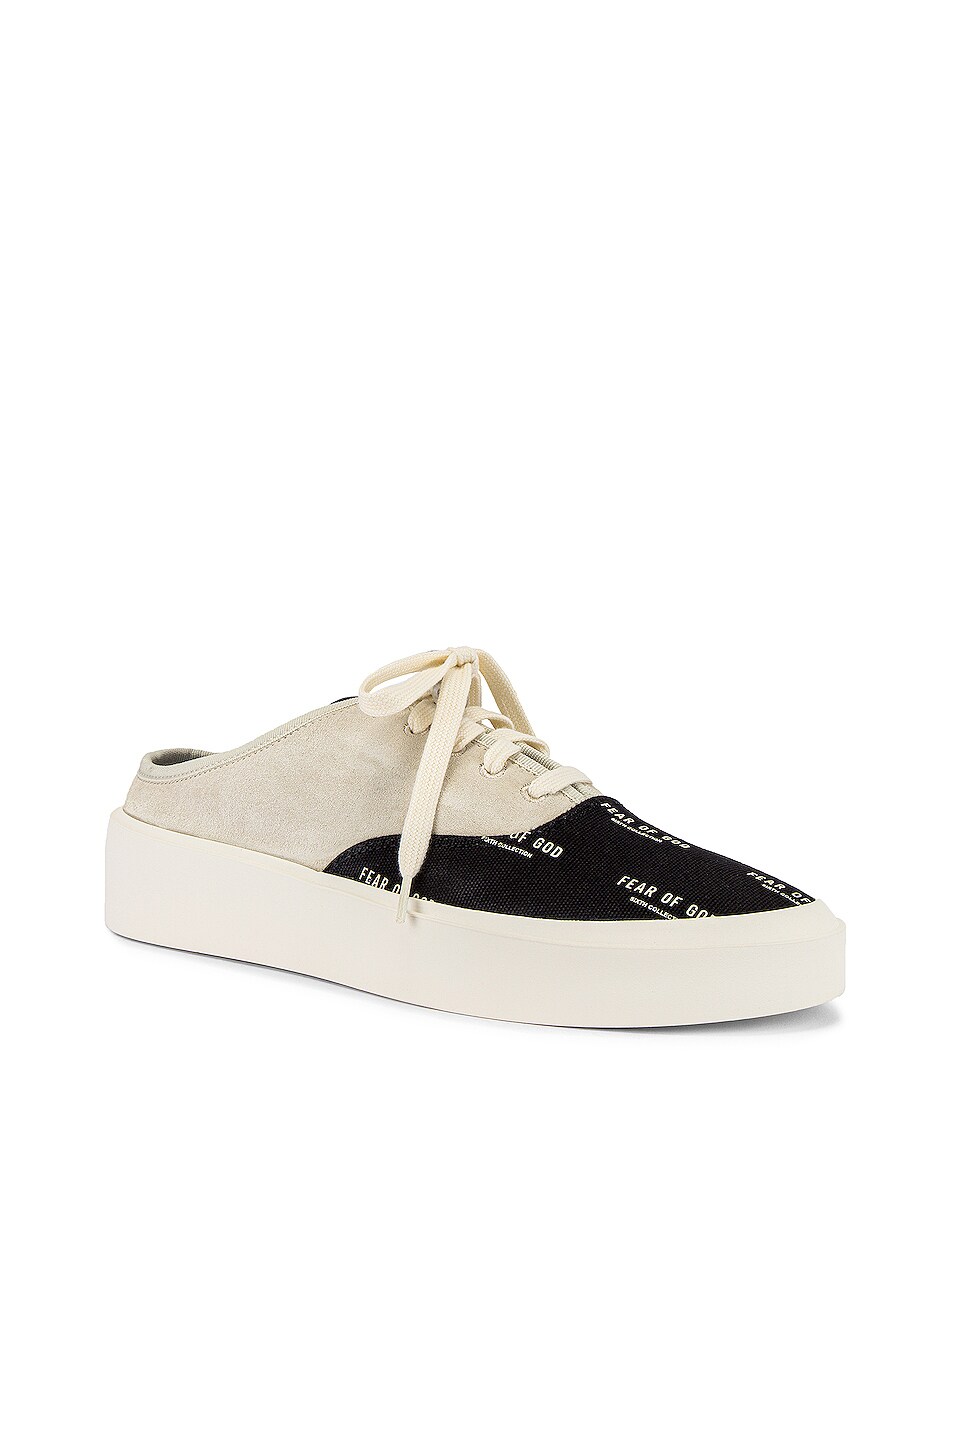 Image 1 of Fear of God 101 Backless Sneaker All Over Print in Bone & Black Fear of God Print